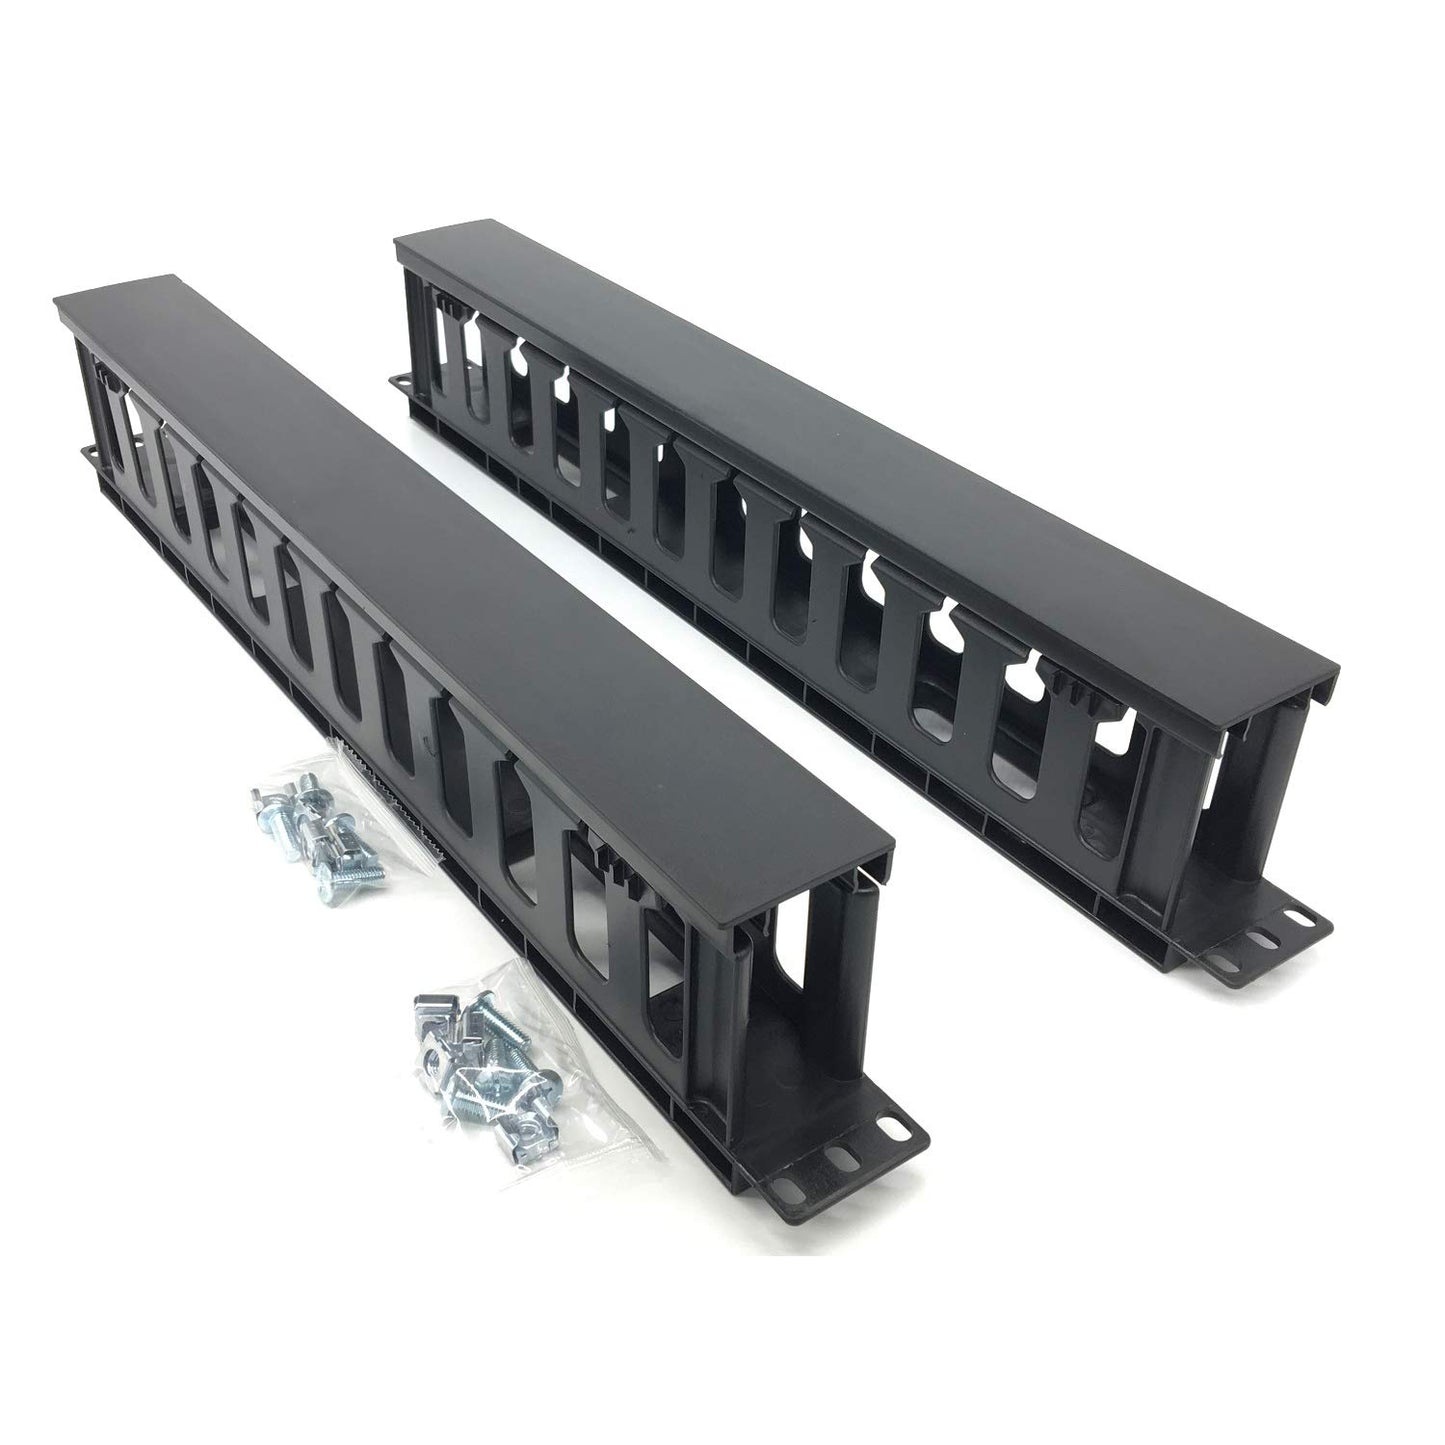 2 Pack 1U 19 Inch Cable Manager Horizontal Rack Mount 24 Slot Metal Finger Duct Wire Organizer for Server Rack, Black